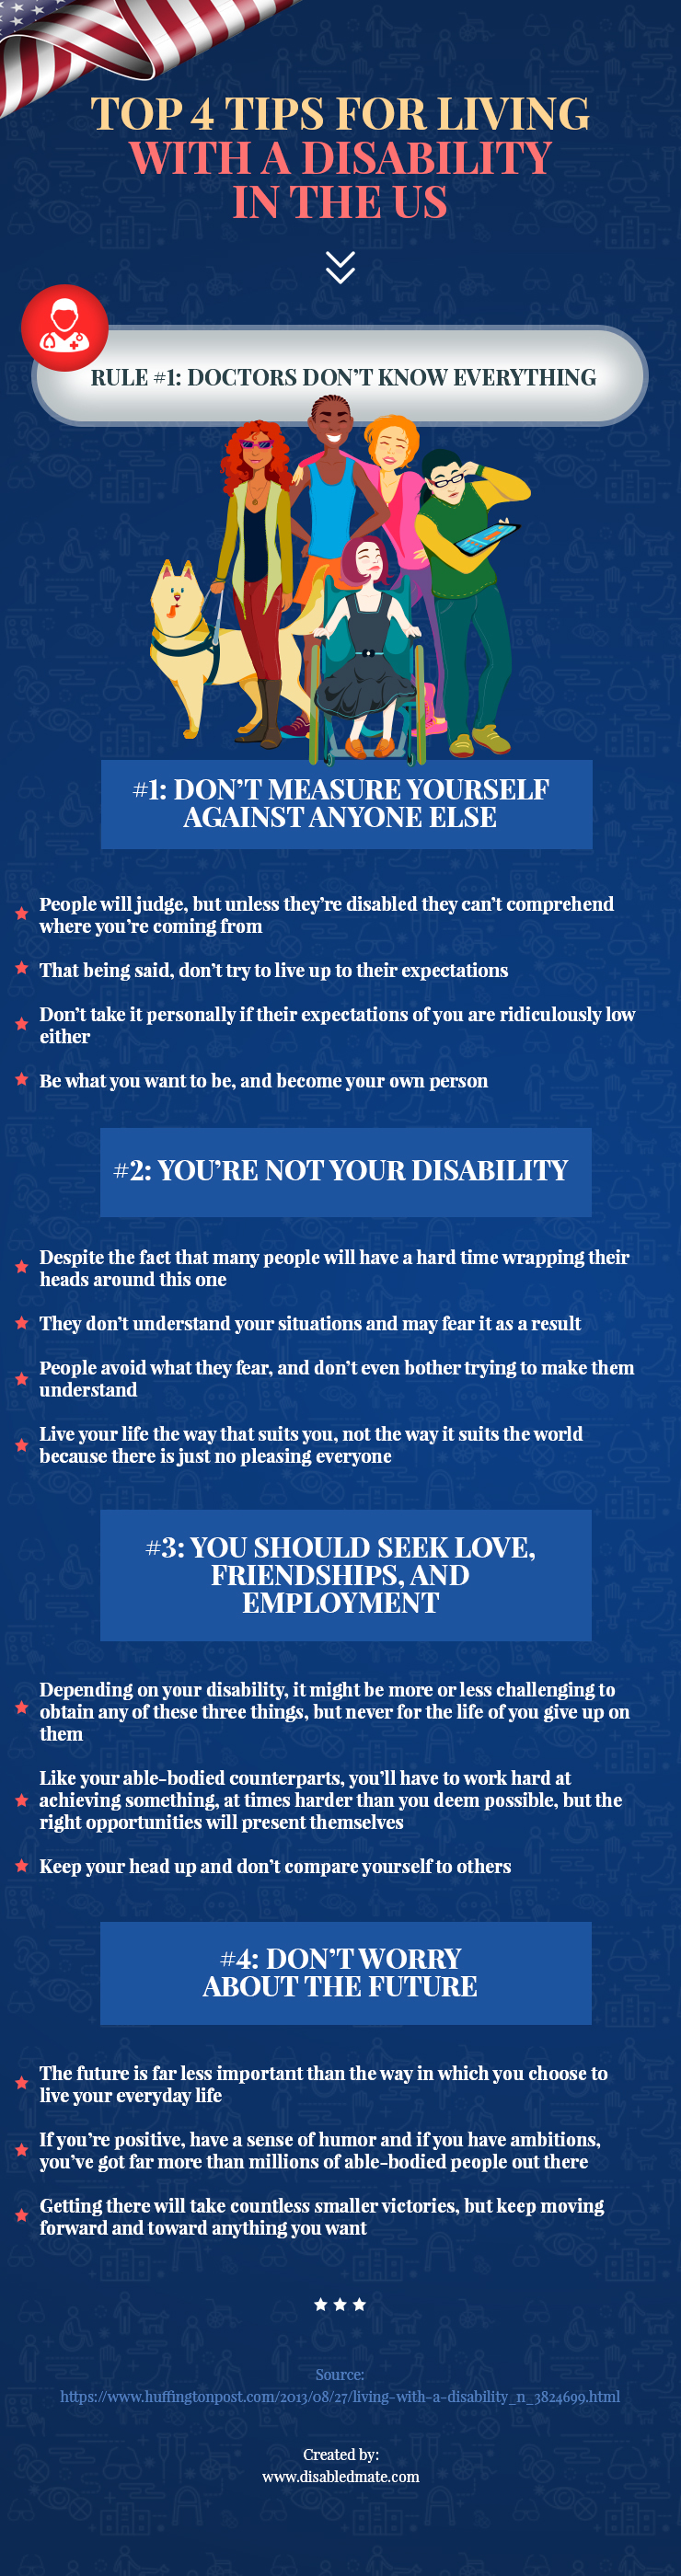 Top 4 Tips for Living with a Disability in the US